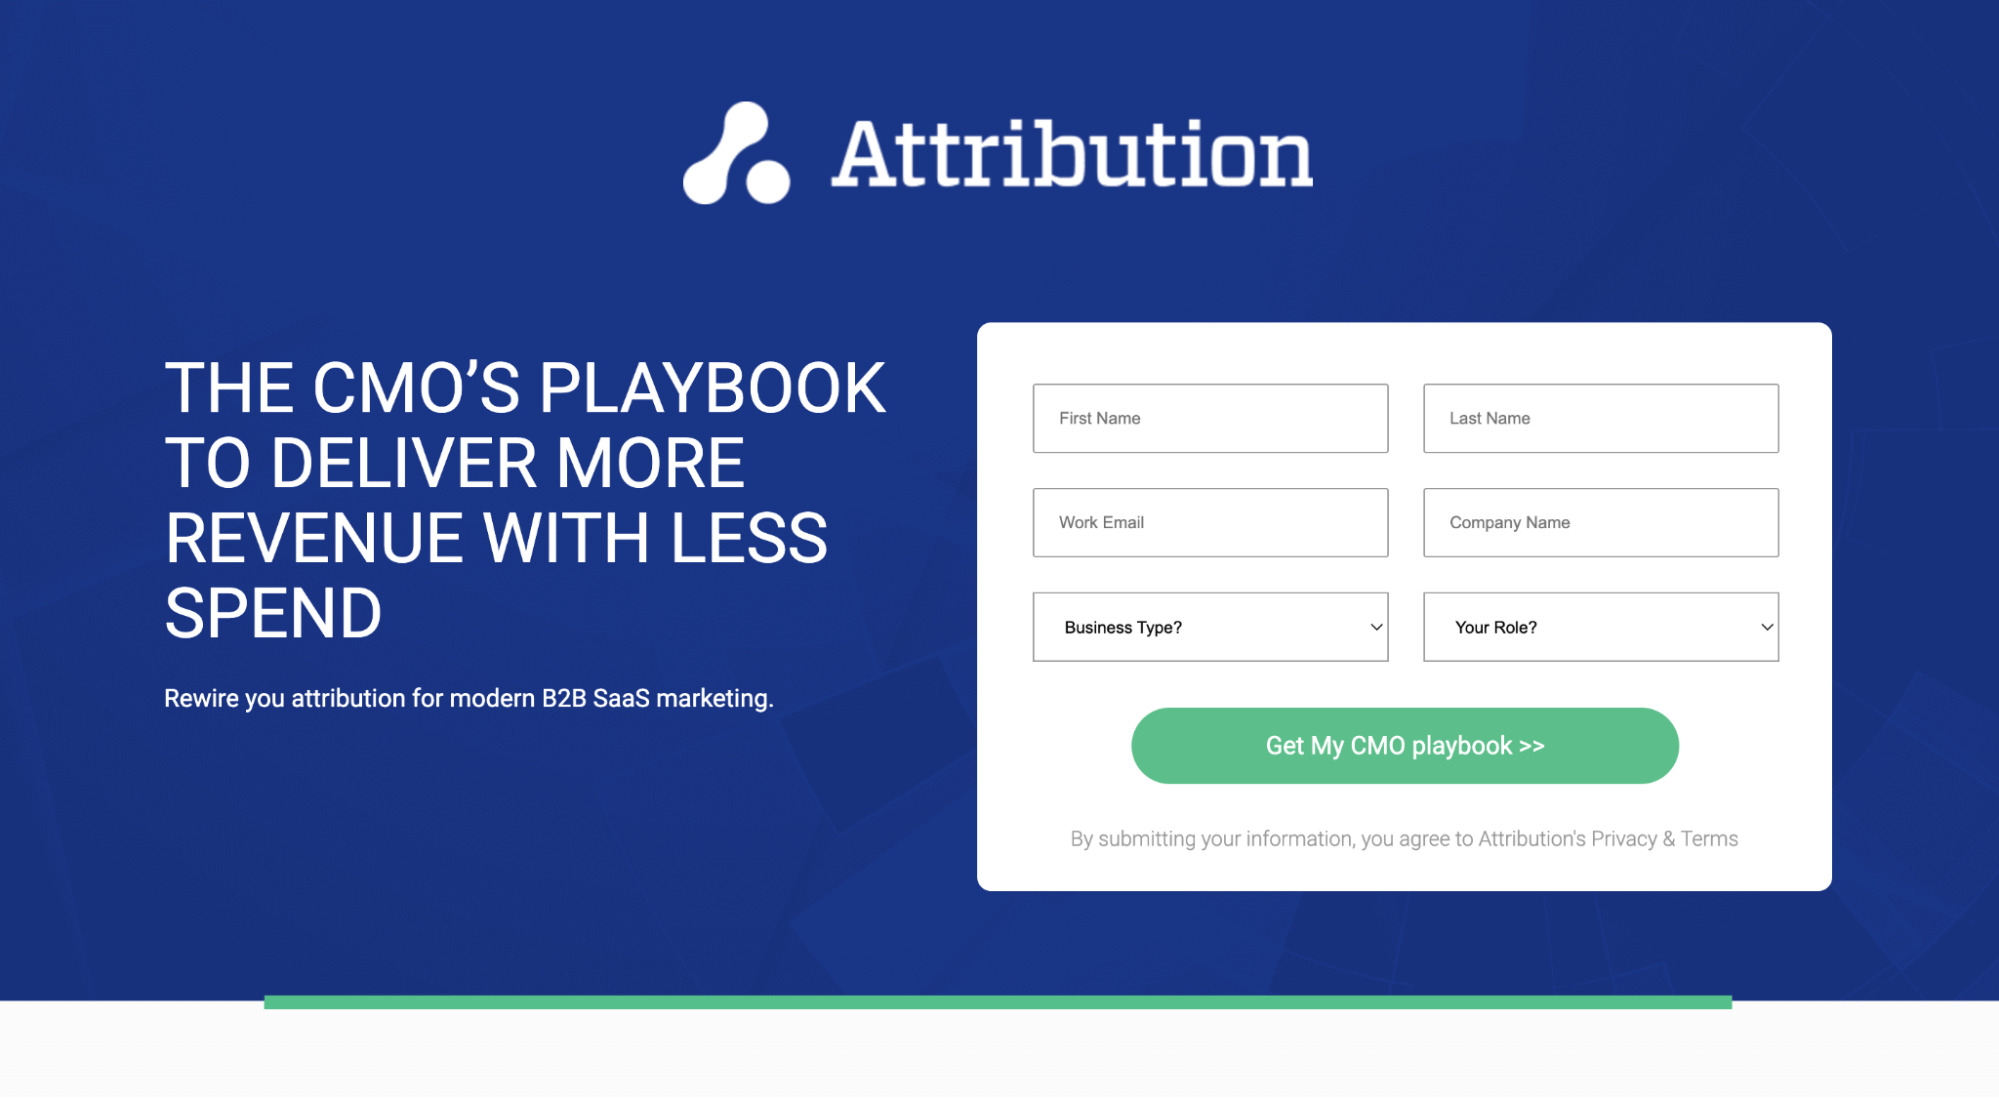 SaaS Lead Magnets: Screenshot of Attribution's CMO's playbook lead magnet signup page